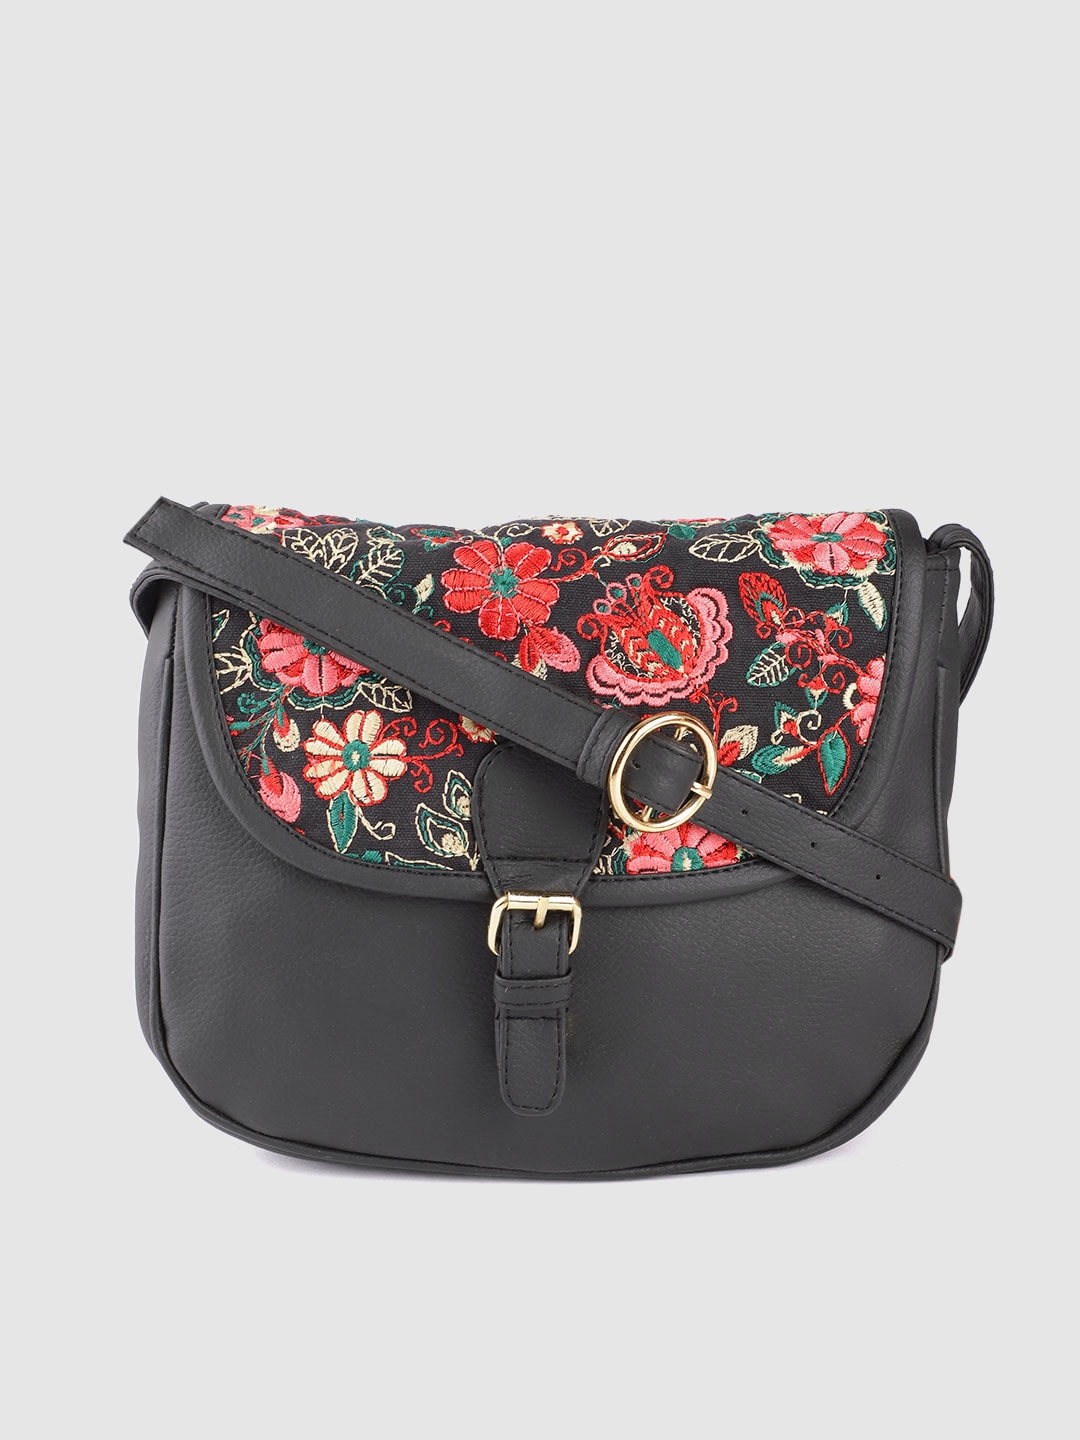 Anouk Black & Pink Floral Embroidered Sling Bag Price in India